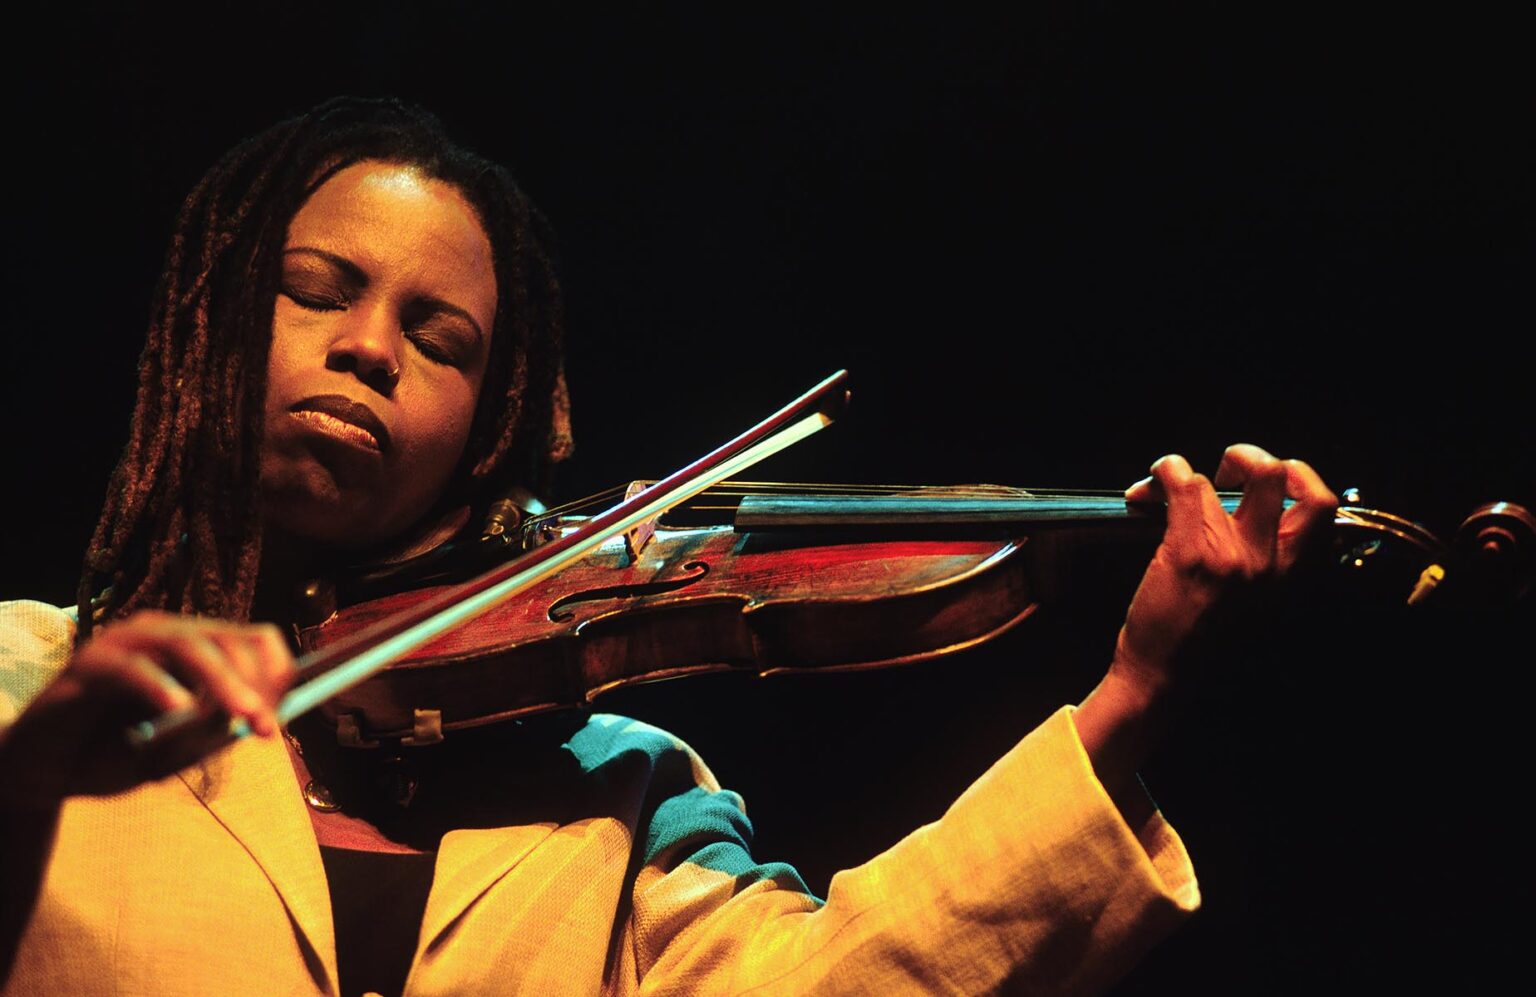 RAGINA CARTER plays the VIOLIN with KENNY BARRON on PIANO at the 2001 MONTEREY JAZZ FESTIVAL - CALIFORNIA